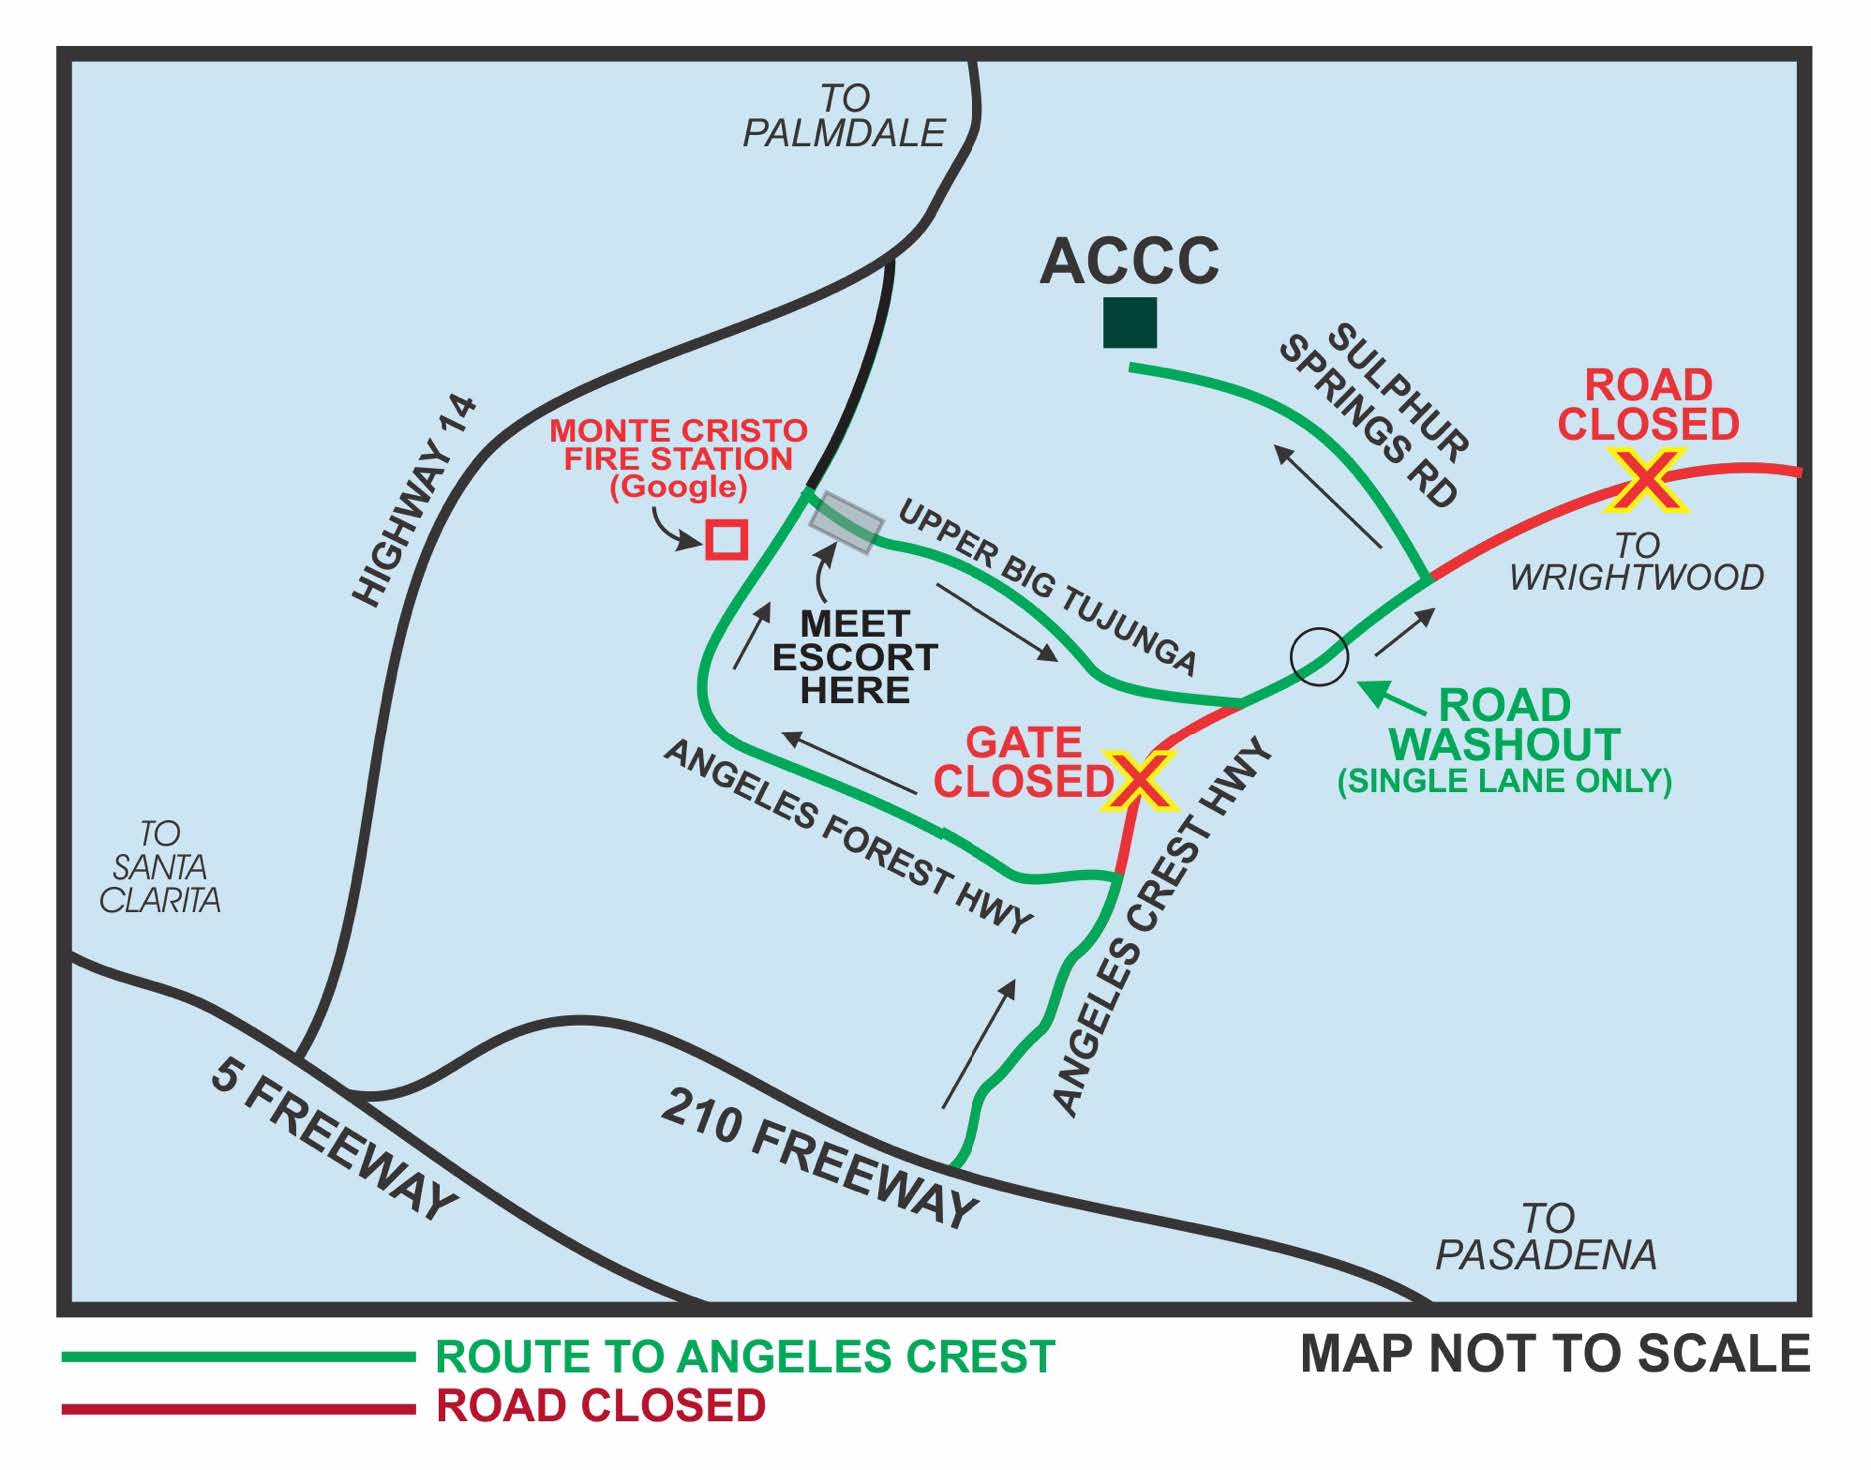 Revised driving directions to Angeles Crest due to road construction